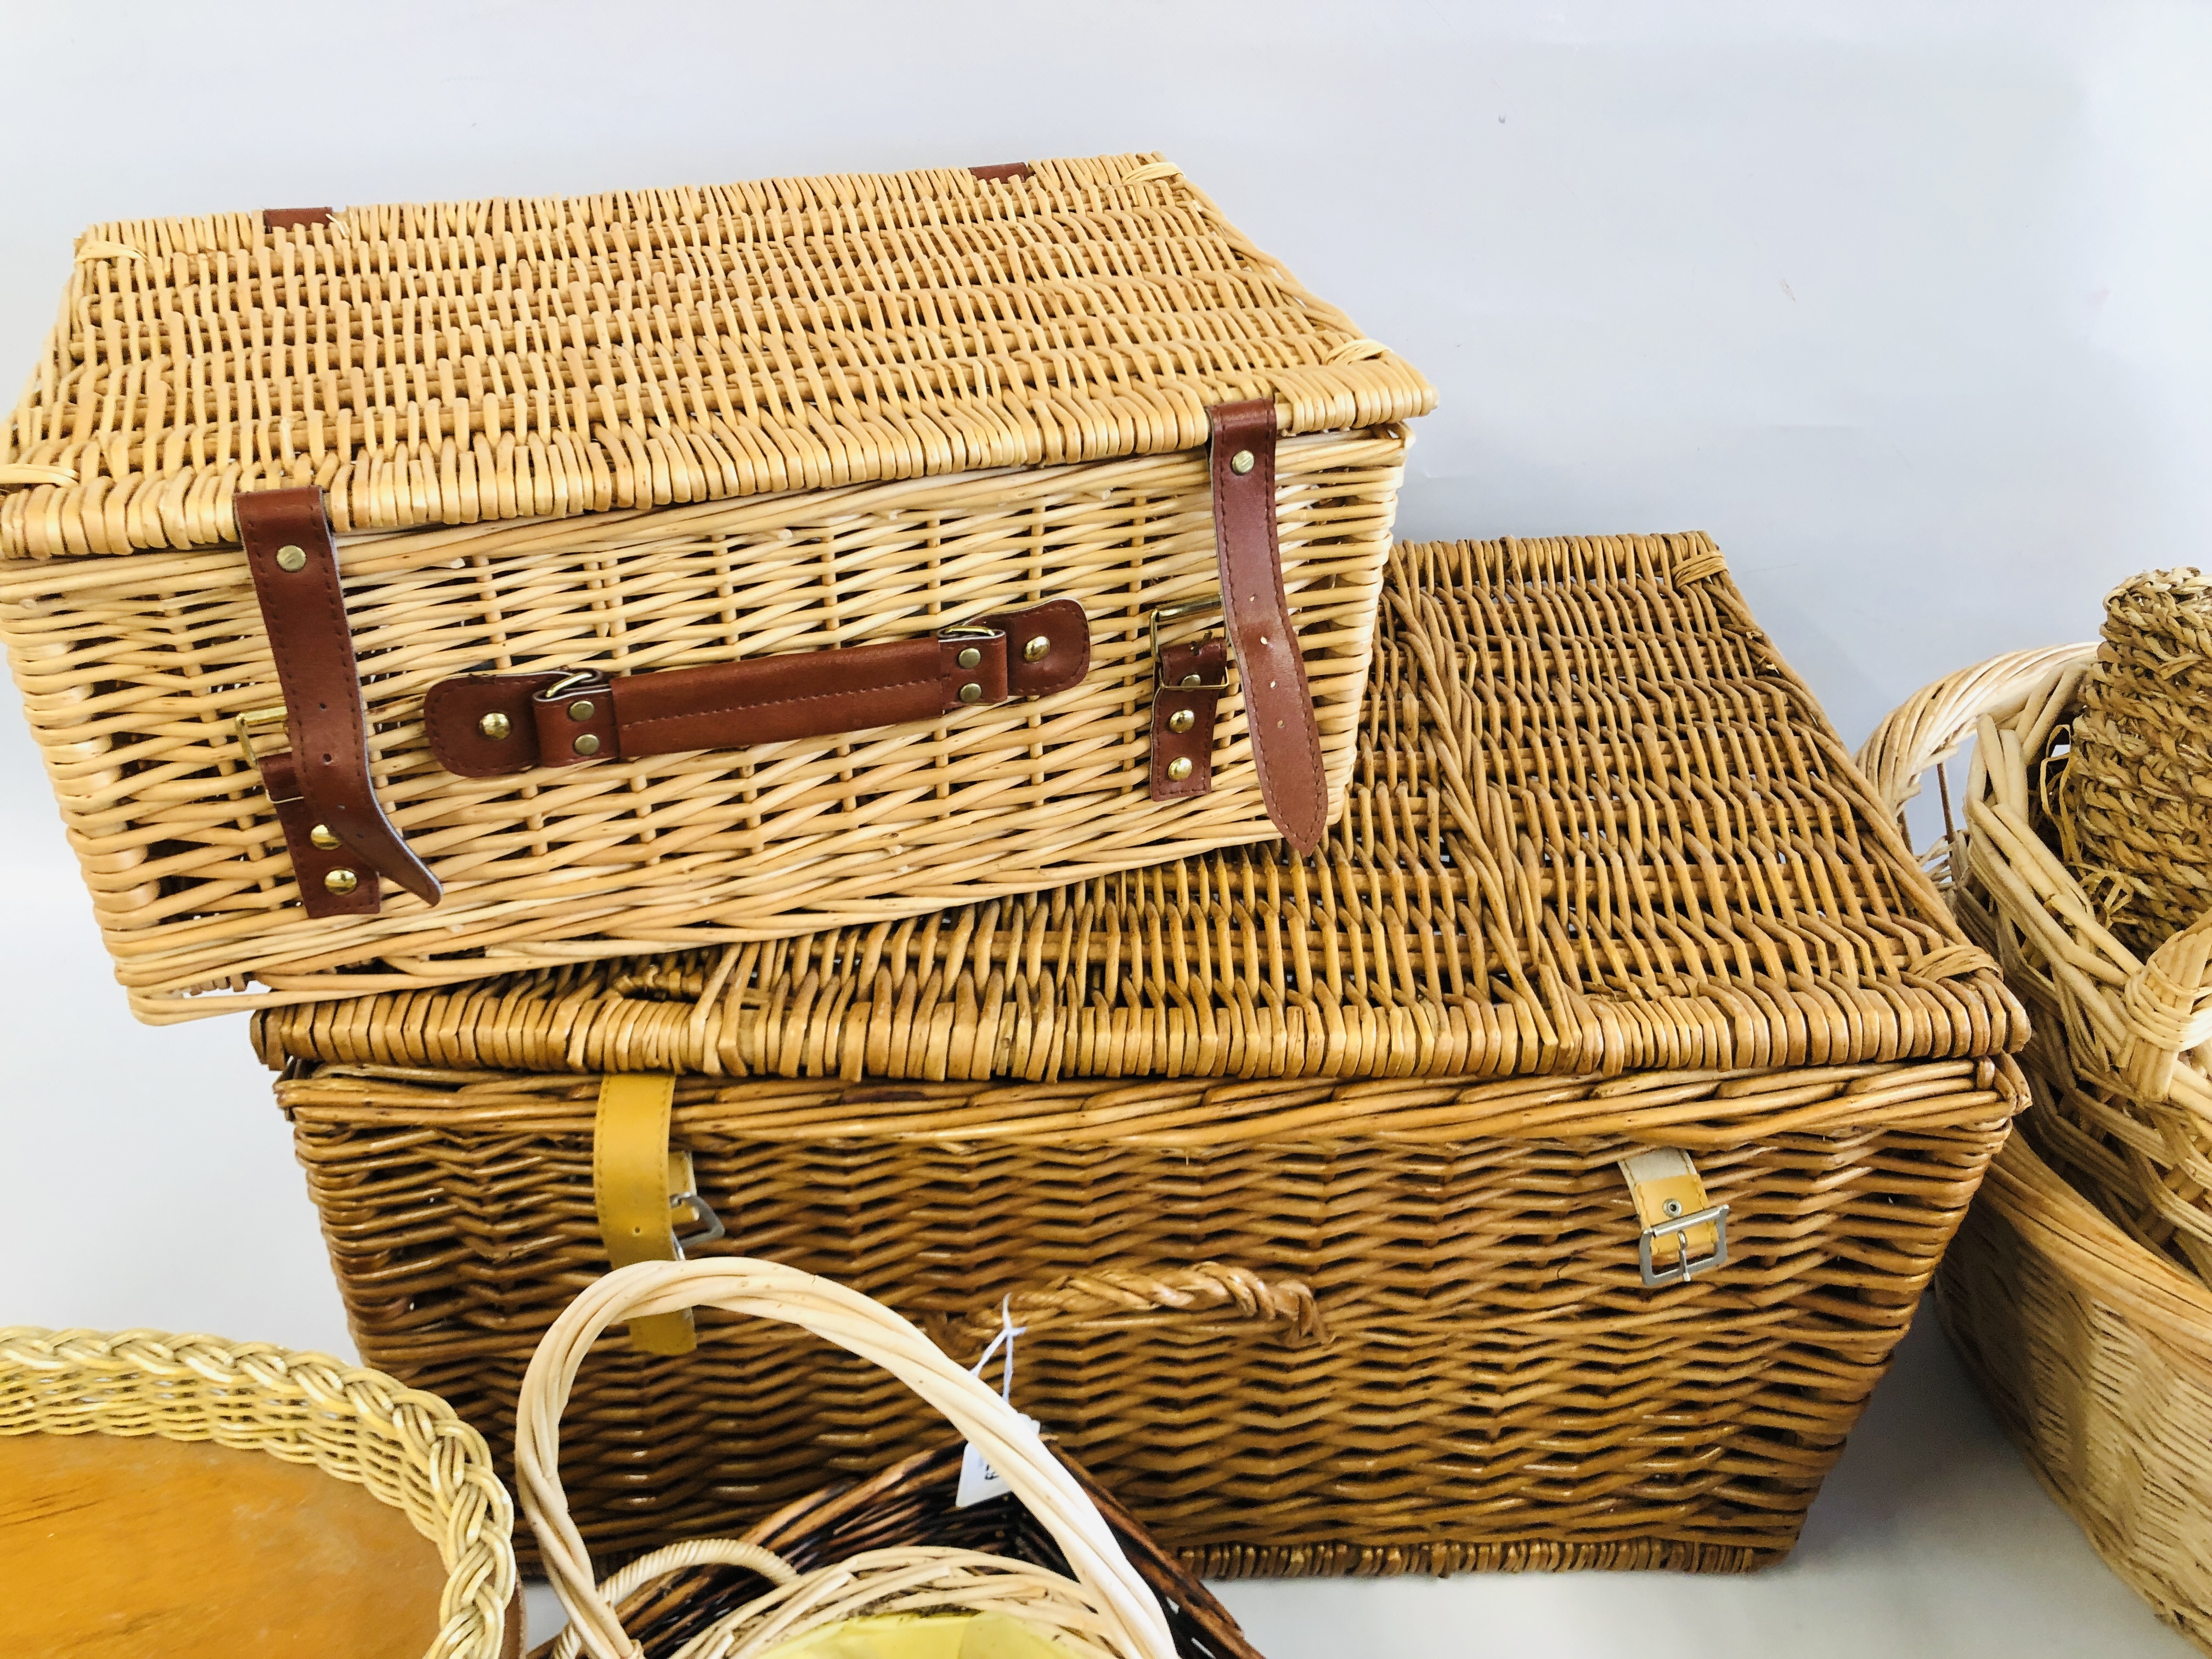 A COLLECTION OF 12 WICKER BASKETS AND HAMPERS ALONG WITH A FURTHER INCOMPLETE PICNIC HAMPER. - Image 5 of 6